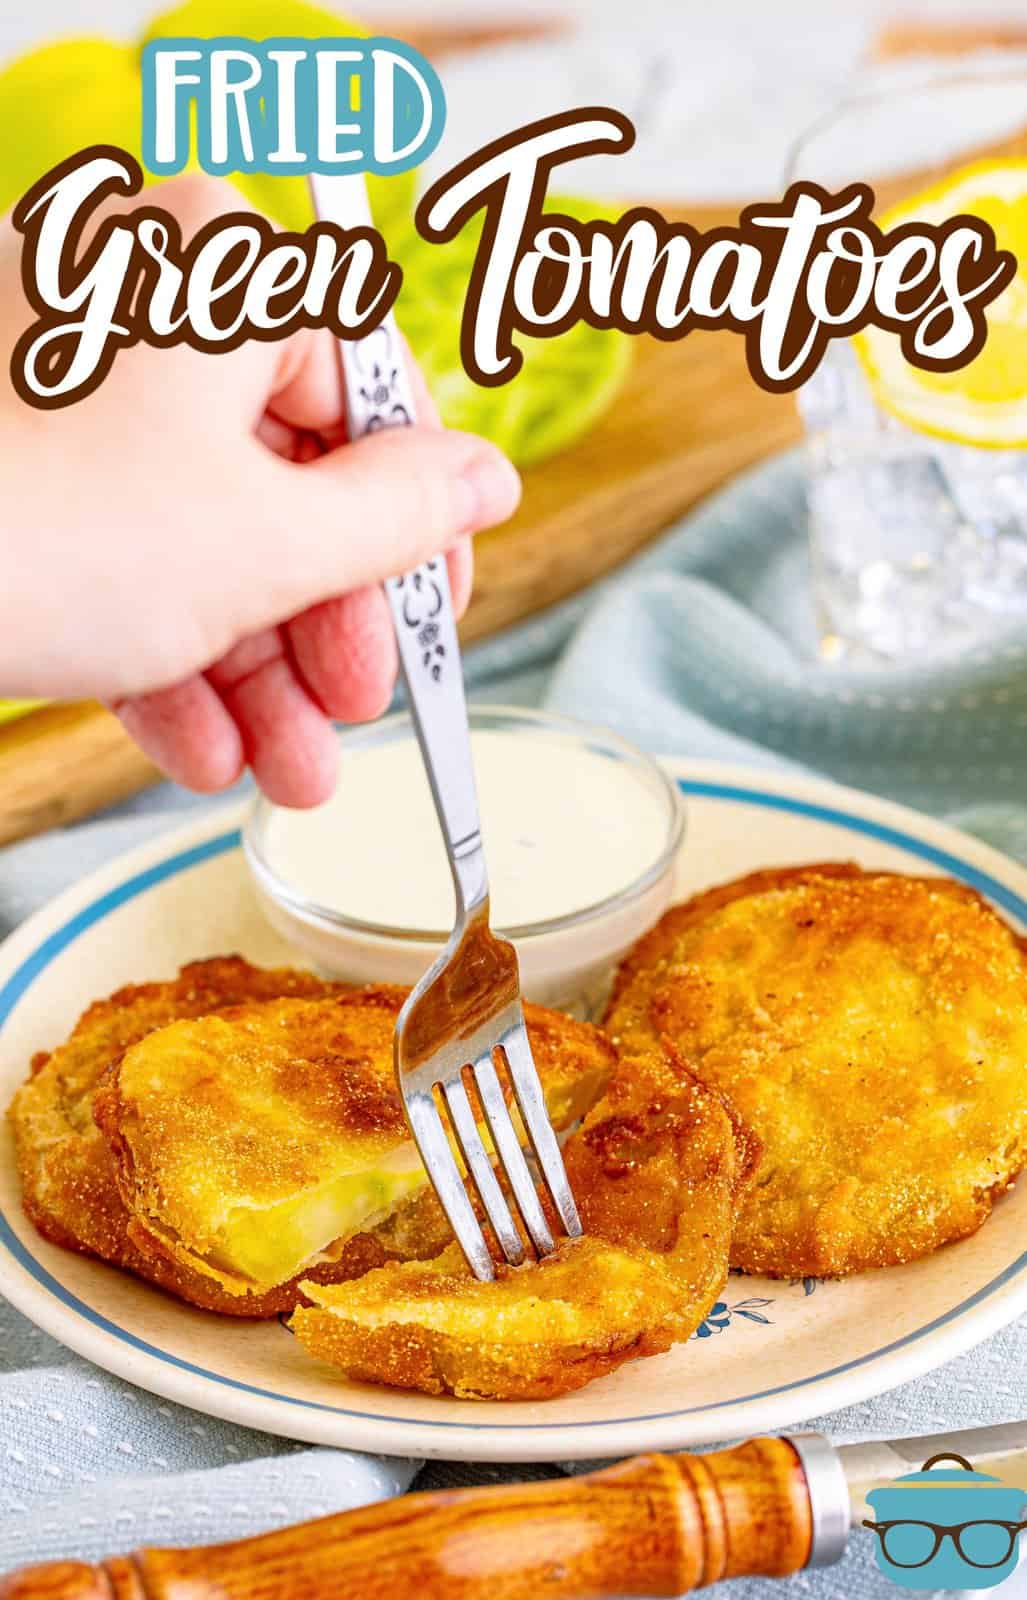 Pinterest image of fork poking into one of the Fried Green Tomatoes on plate.